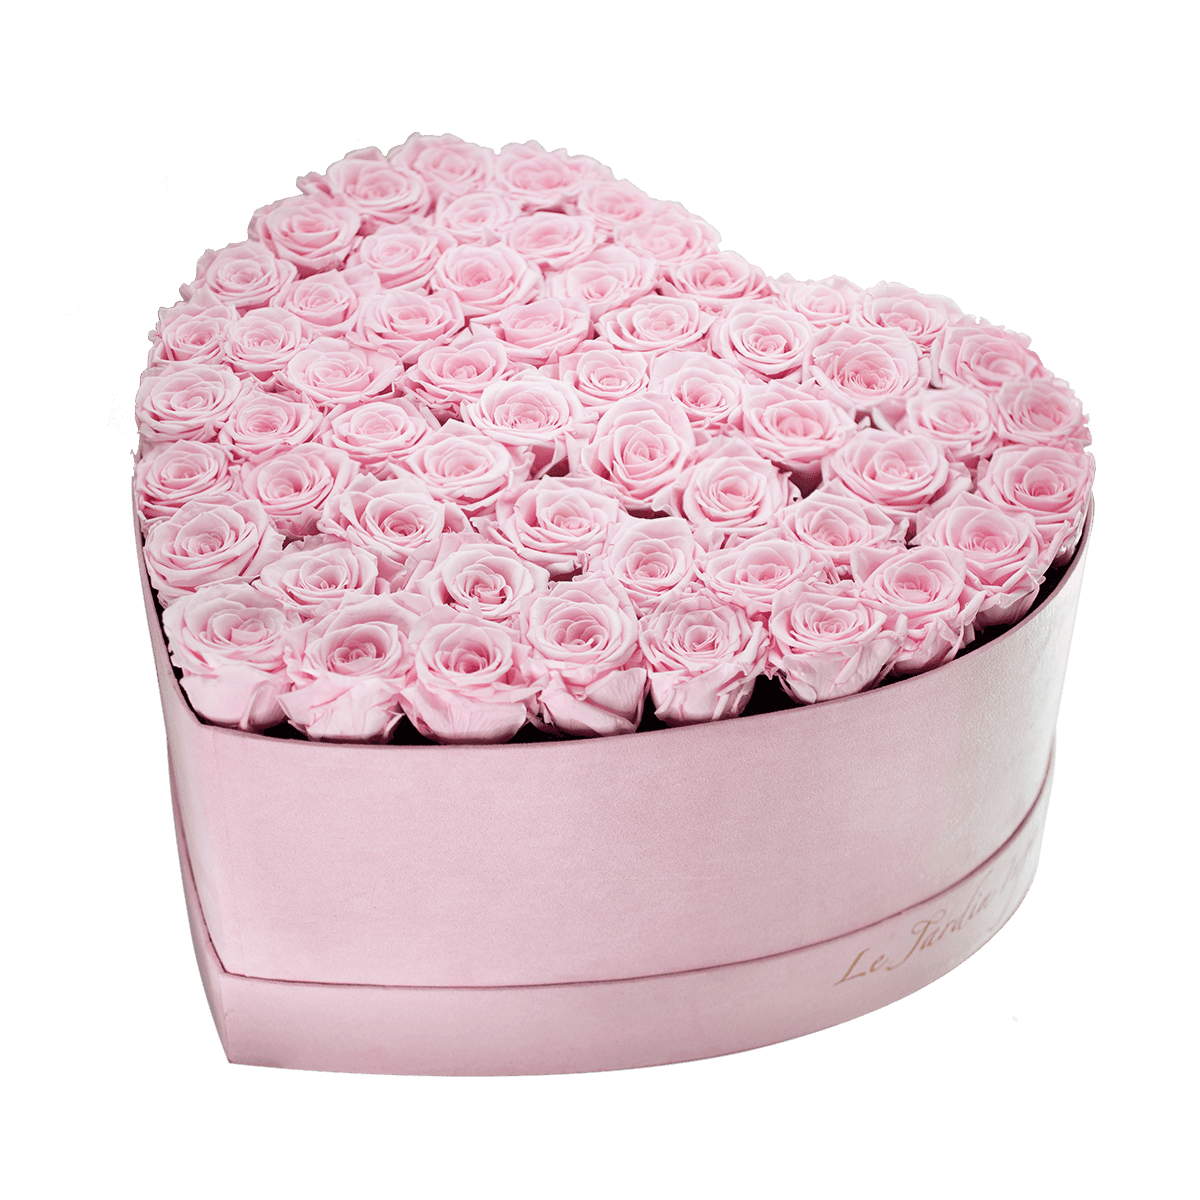 65-75 Soft Pink Preserved Roses in A Heart Shaped Box - Medium Heart Luxury Pink Suede Box